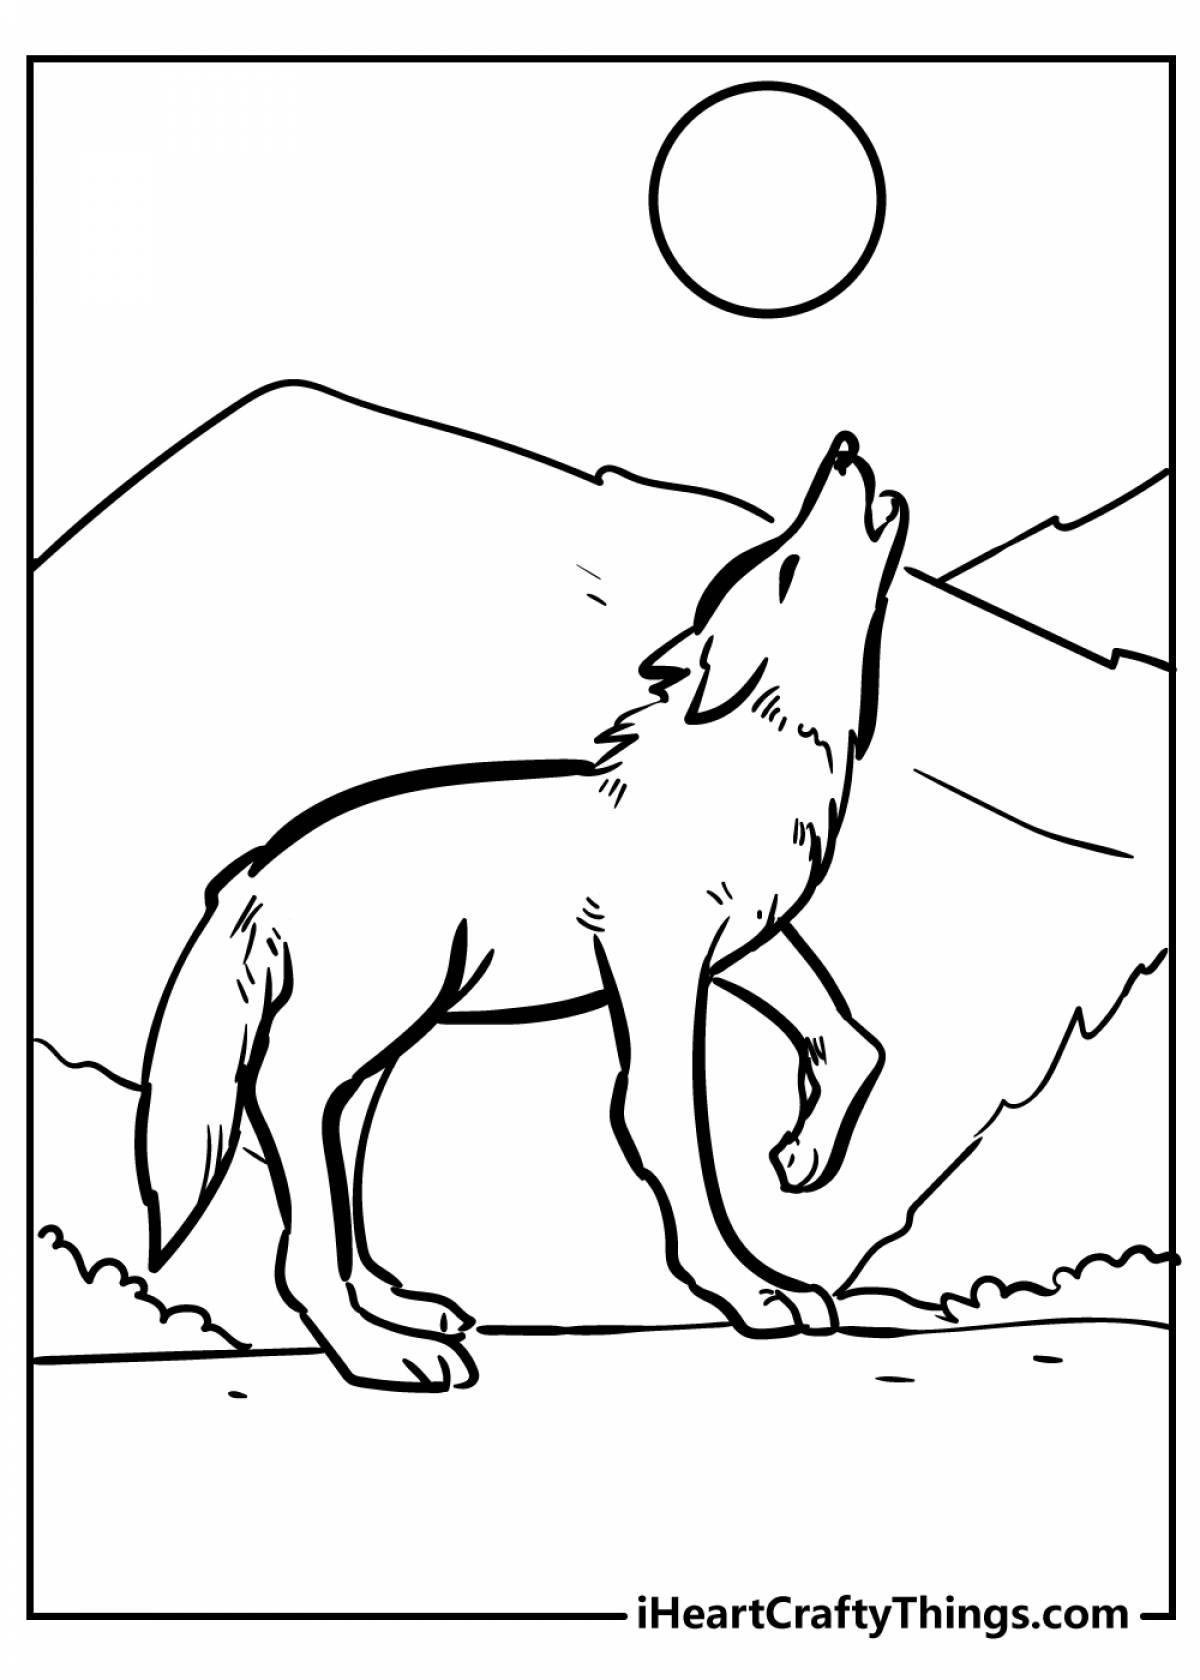 Wolf howling at the moon #7